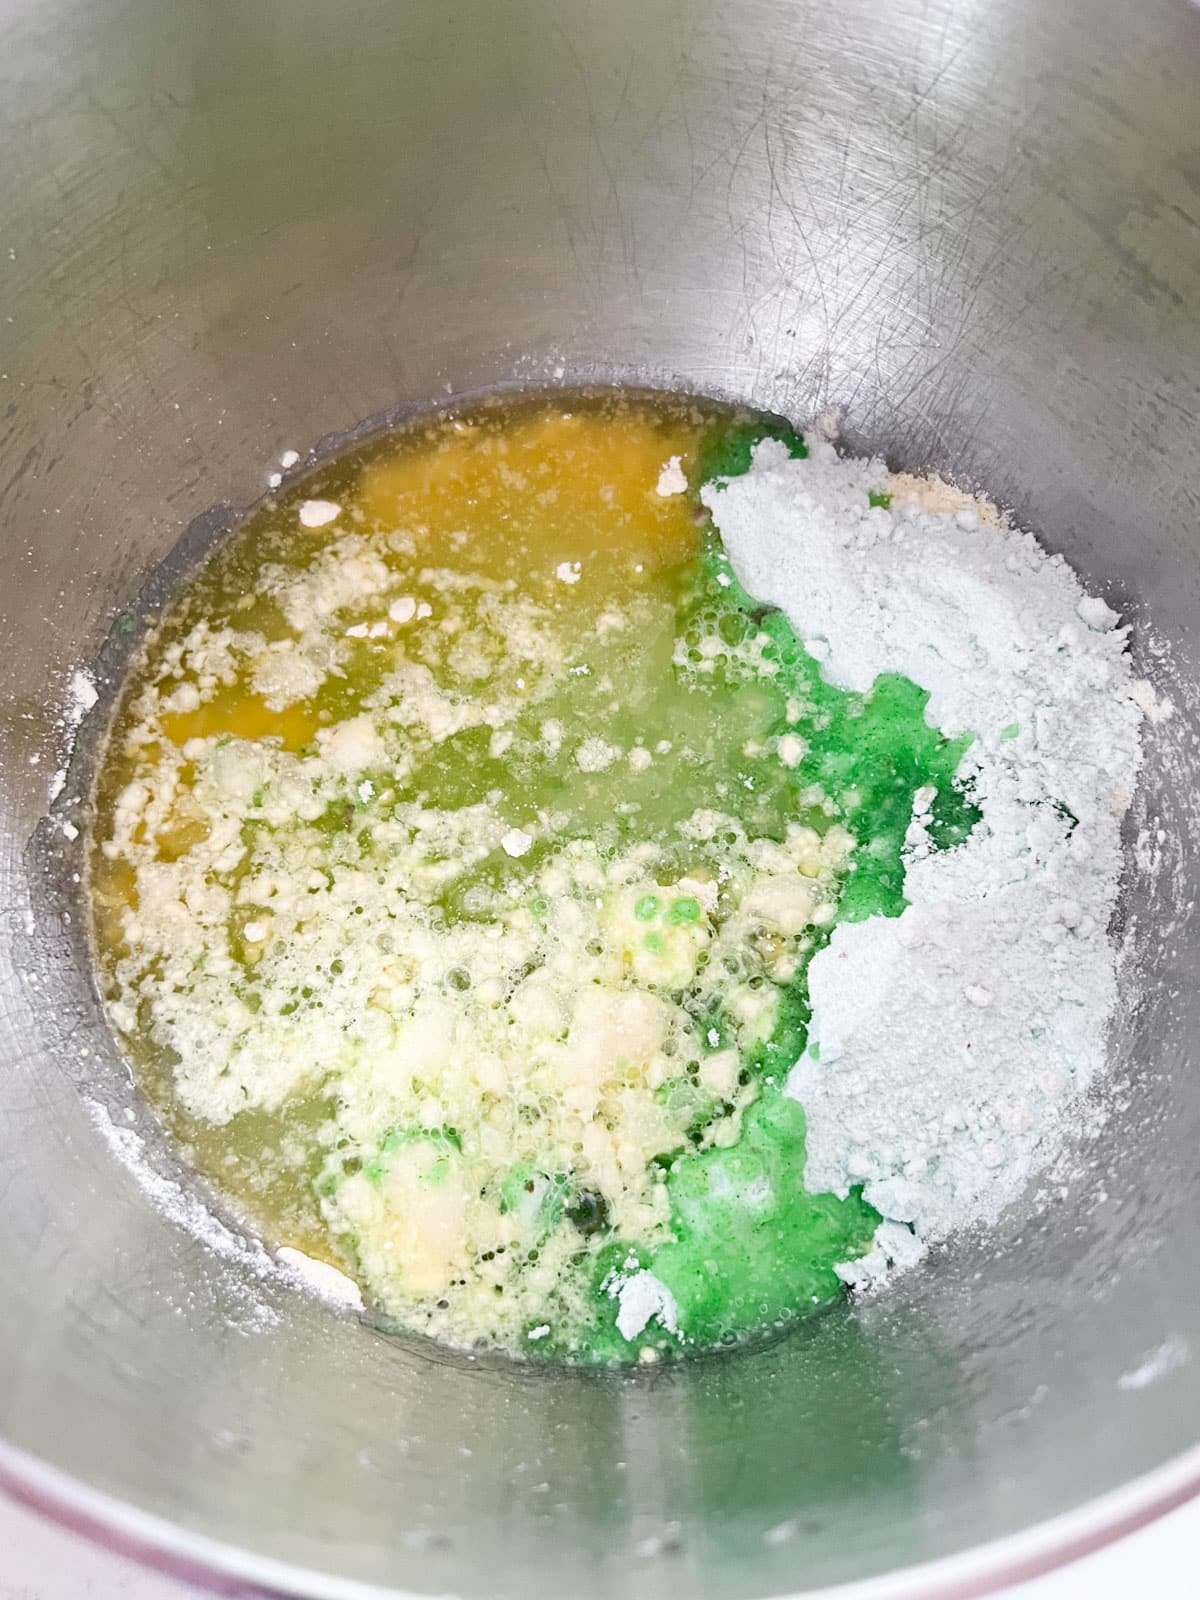 Cake ingredients in a metal stand mixer bowl.